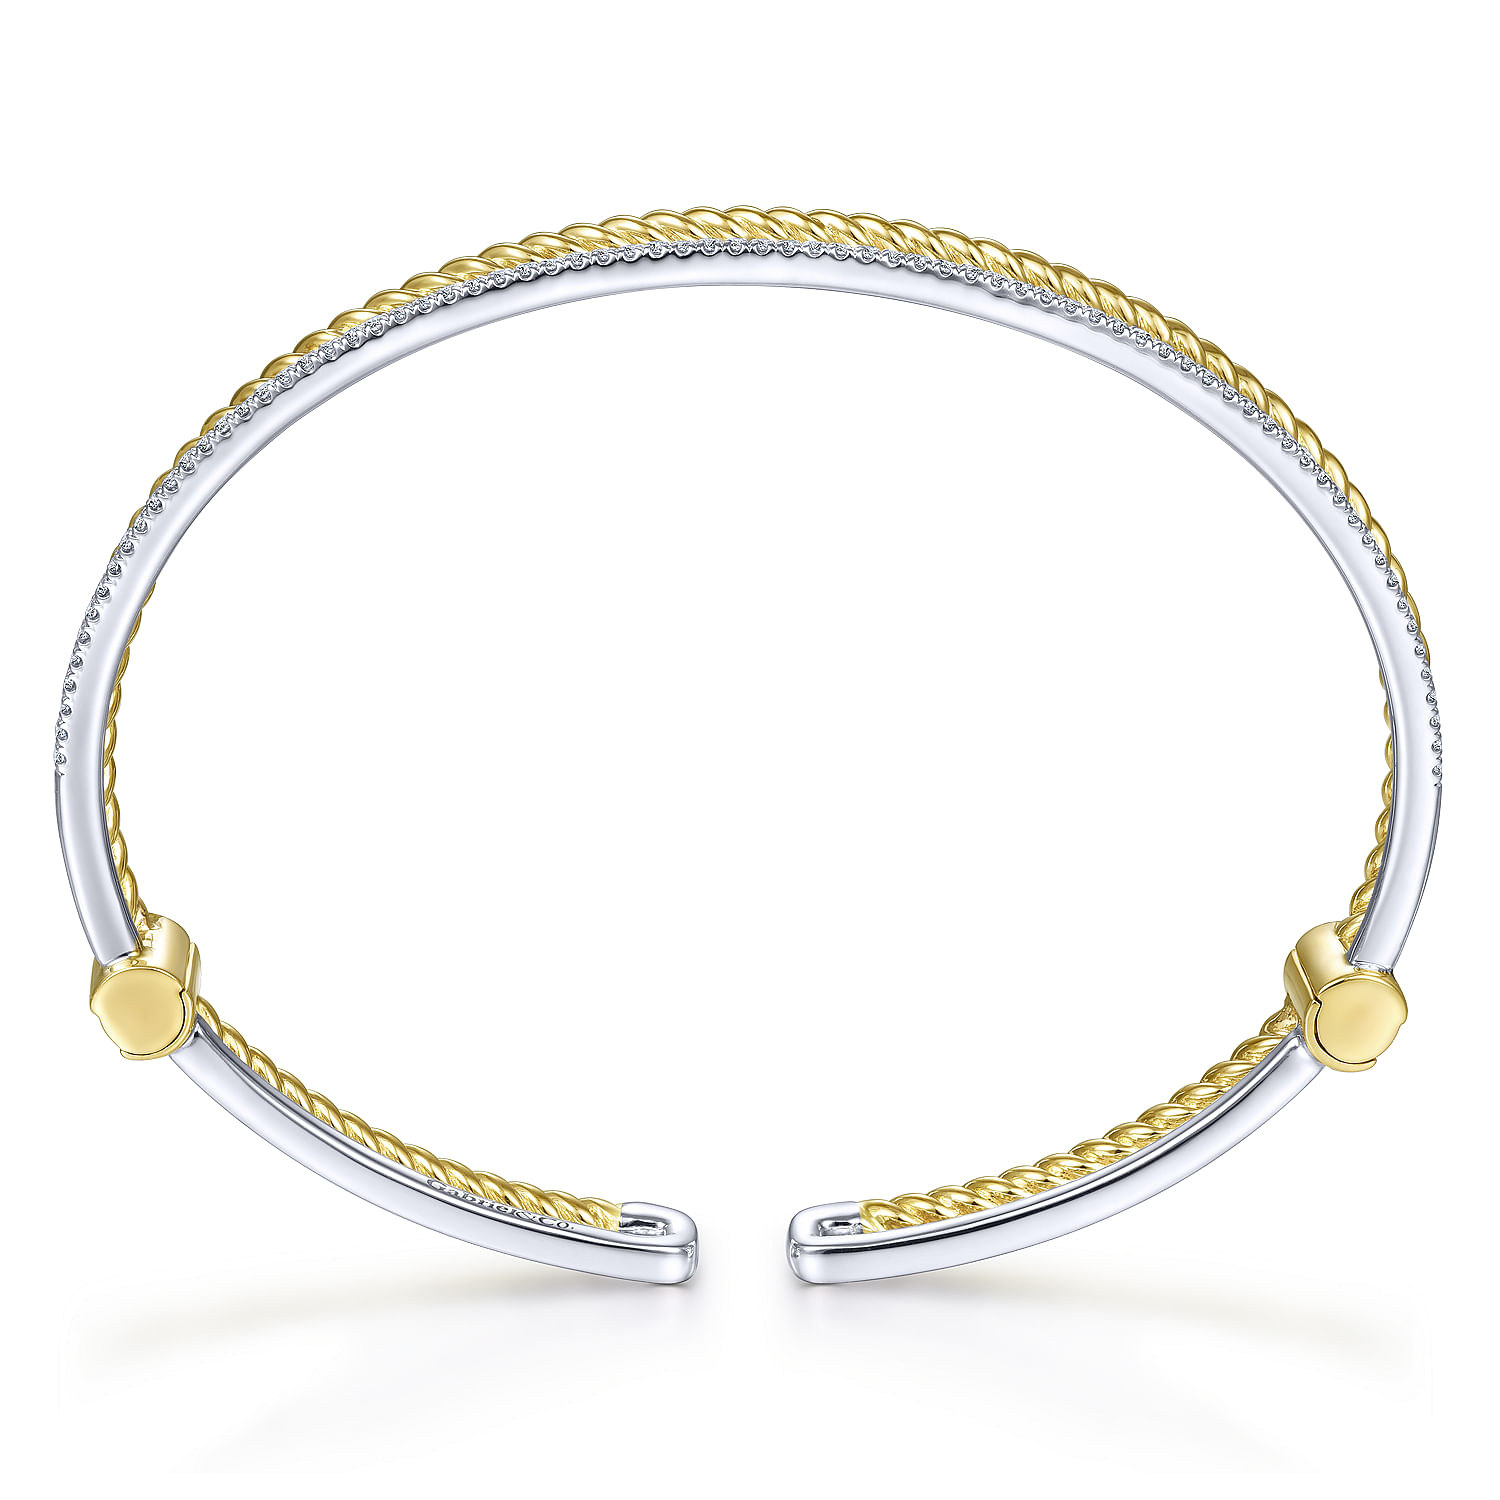 14K Yellow and White Gold Twisted Rope and Diamond Cuff Bracelet